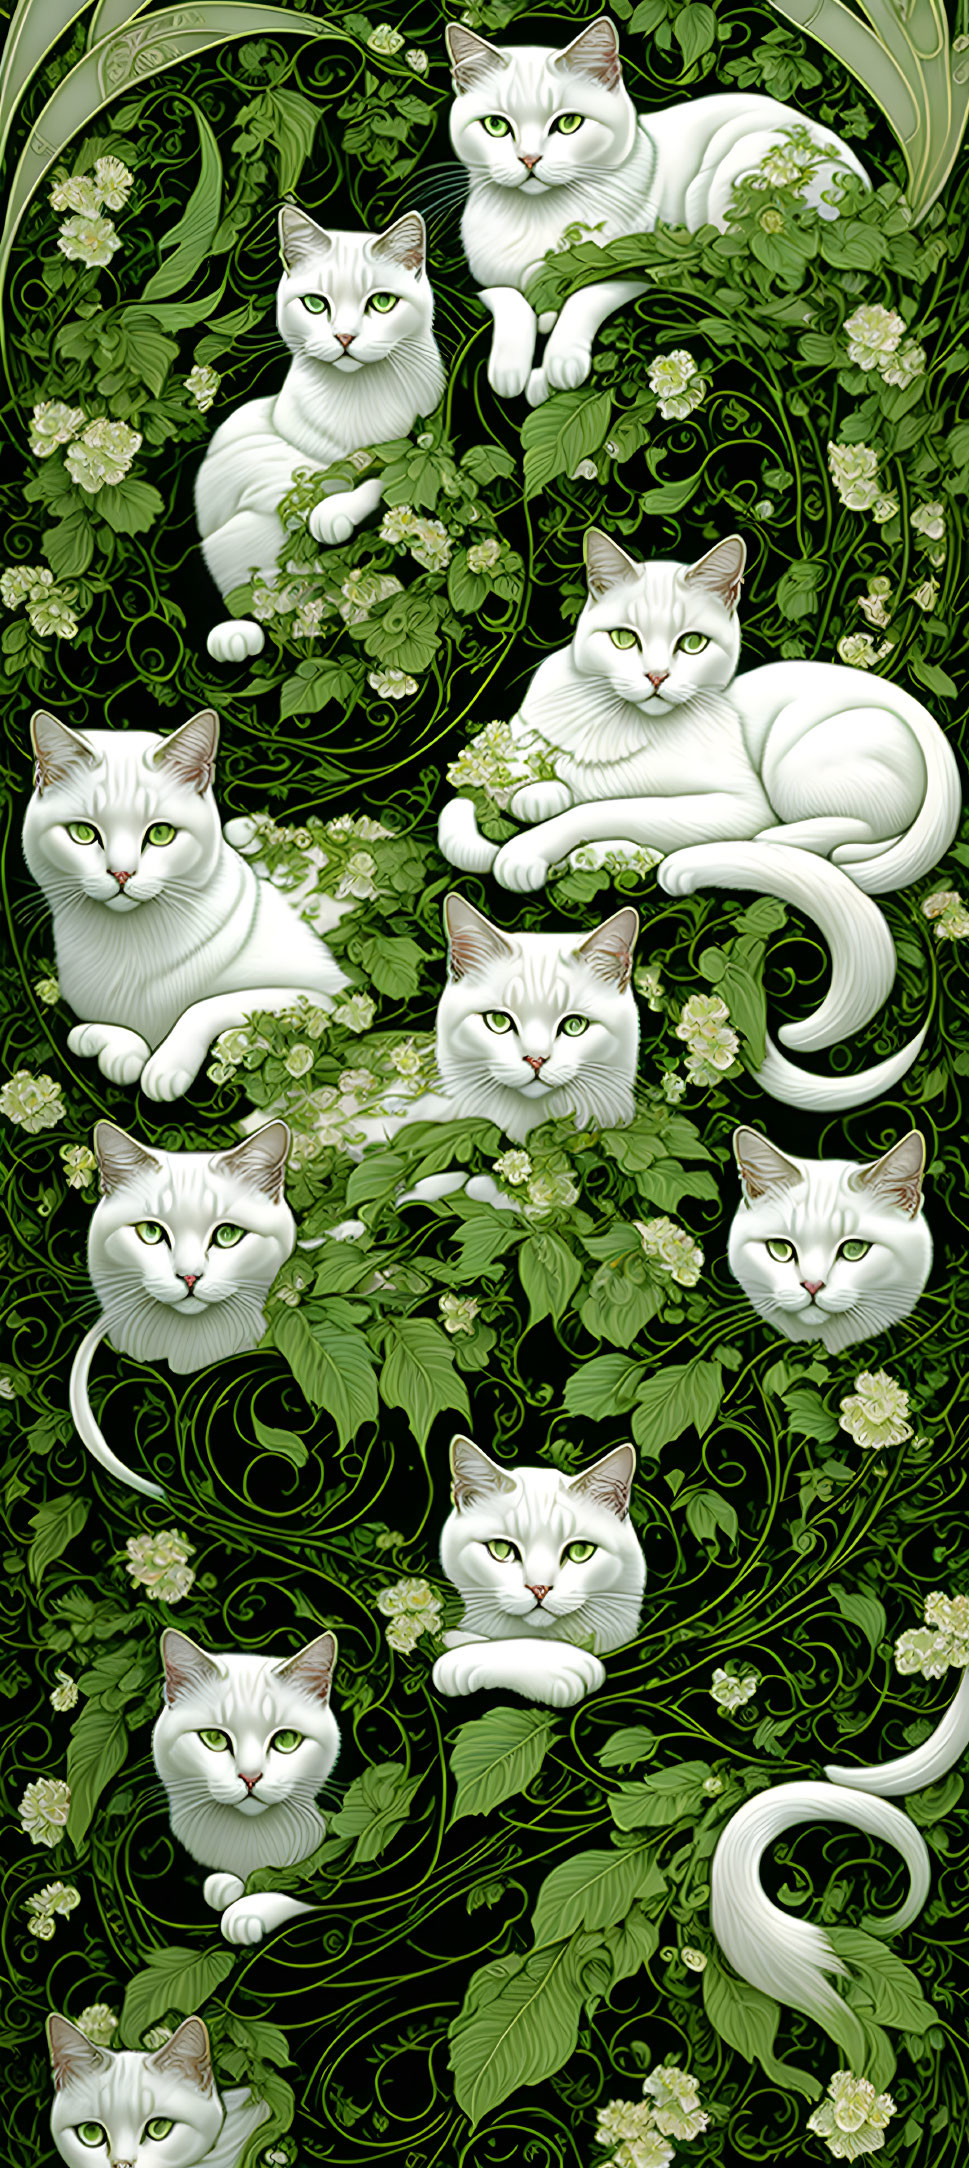 white and black lacy cats. illustration. intricate